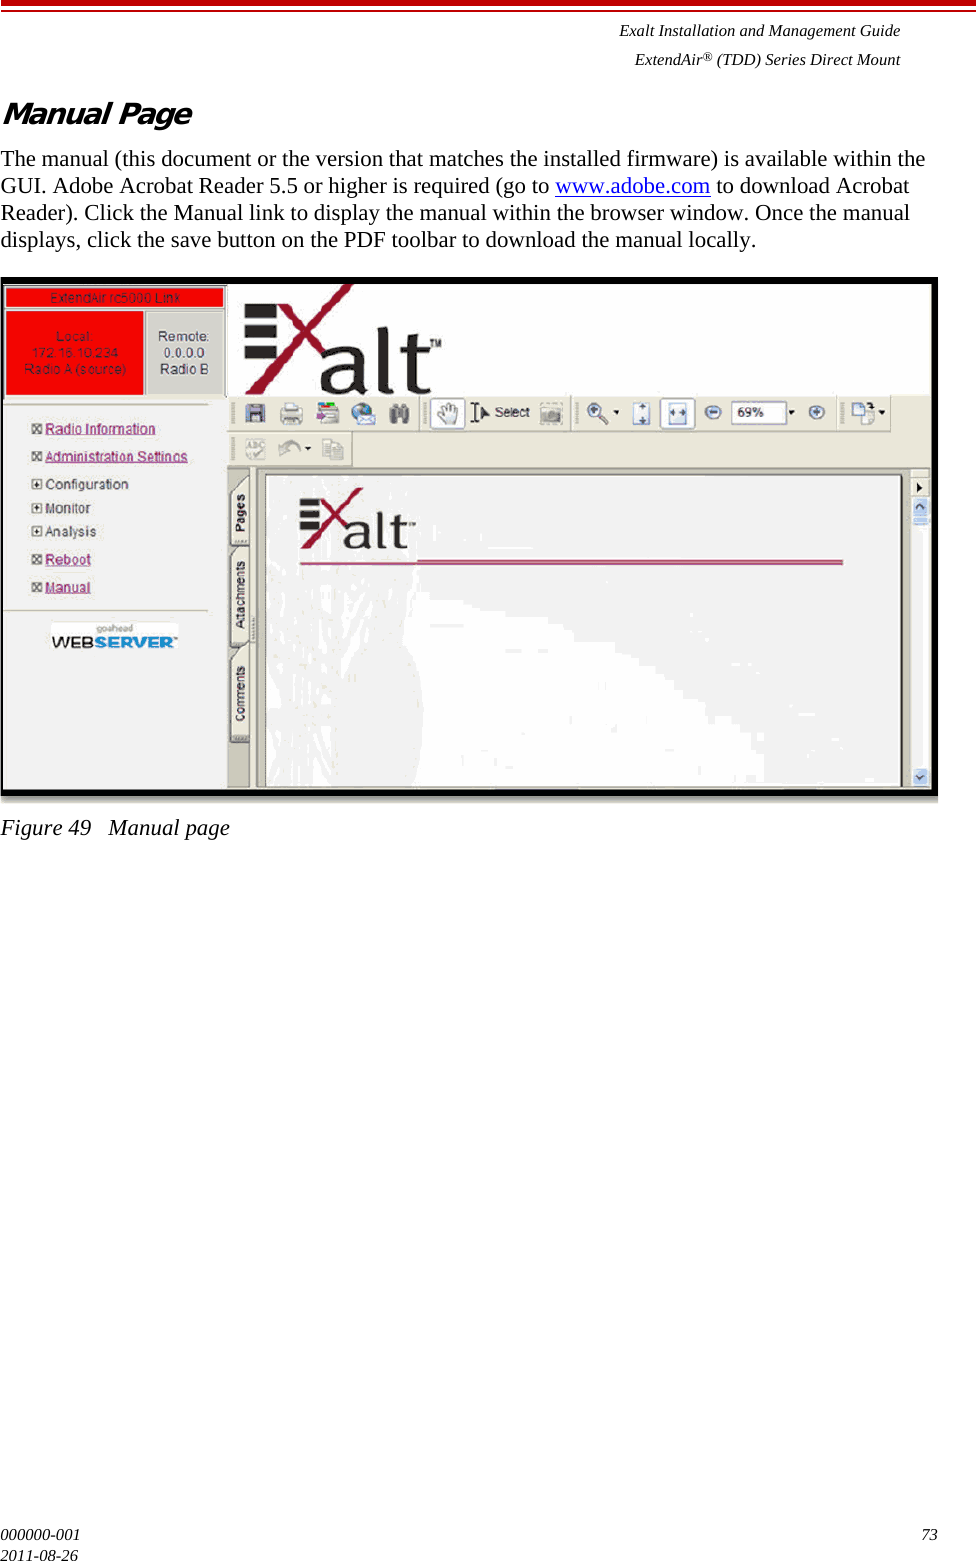 Exalt Installation and Management GuideExtendAir® (TDD) Series Direct Mount000000-001 732011-08-26Manual PageThe manual (this document or the version that matches the installed firmware) is available within the GUI. Adobe Acrobat Reader 5.5 or higher is required (go to www.adobe.com to download Acrobat Reader). Click the Manual link to display the manual within the browser window. Once the manual displays, click the save button on the PDF toolbar to download the manual locally.Figure 49   Manual page